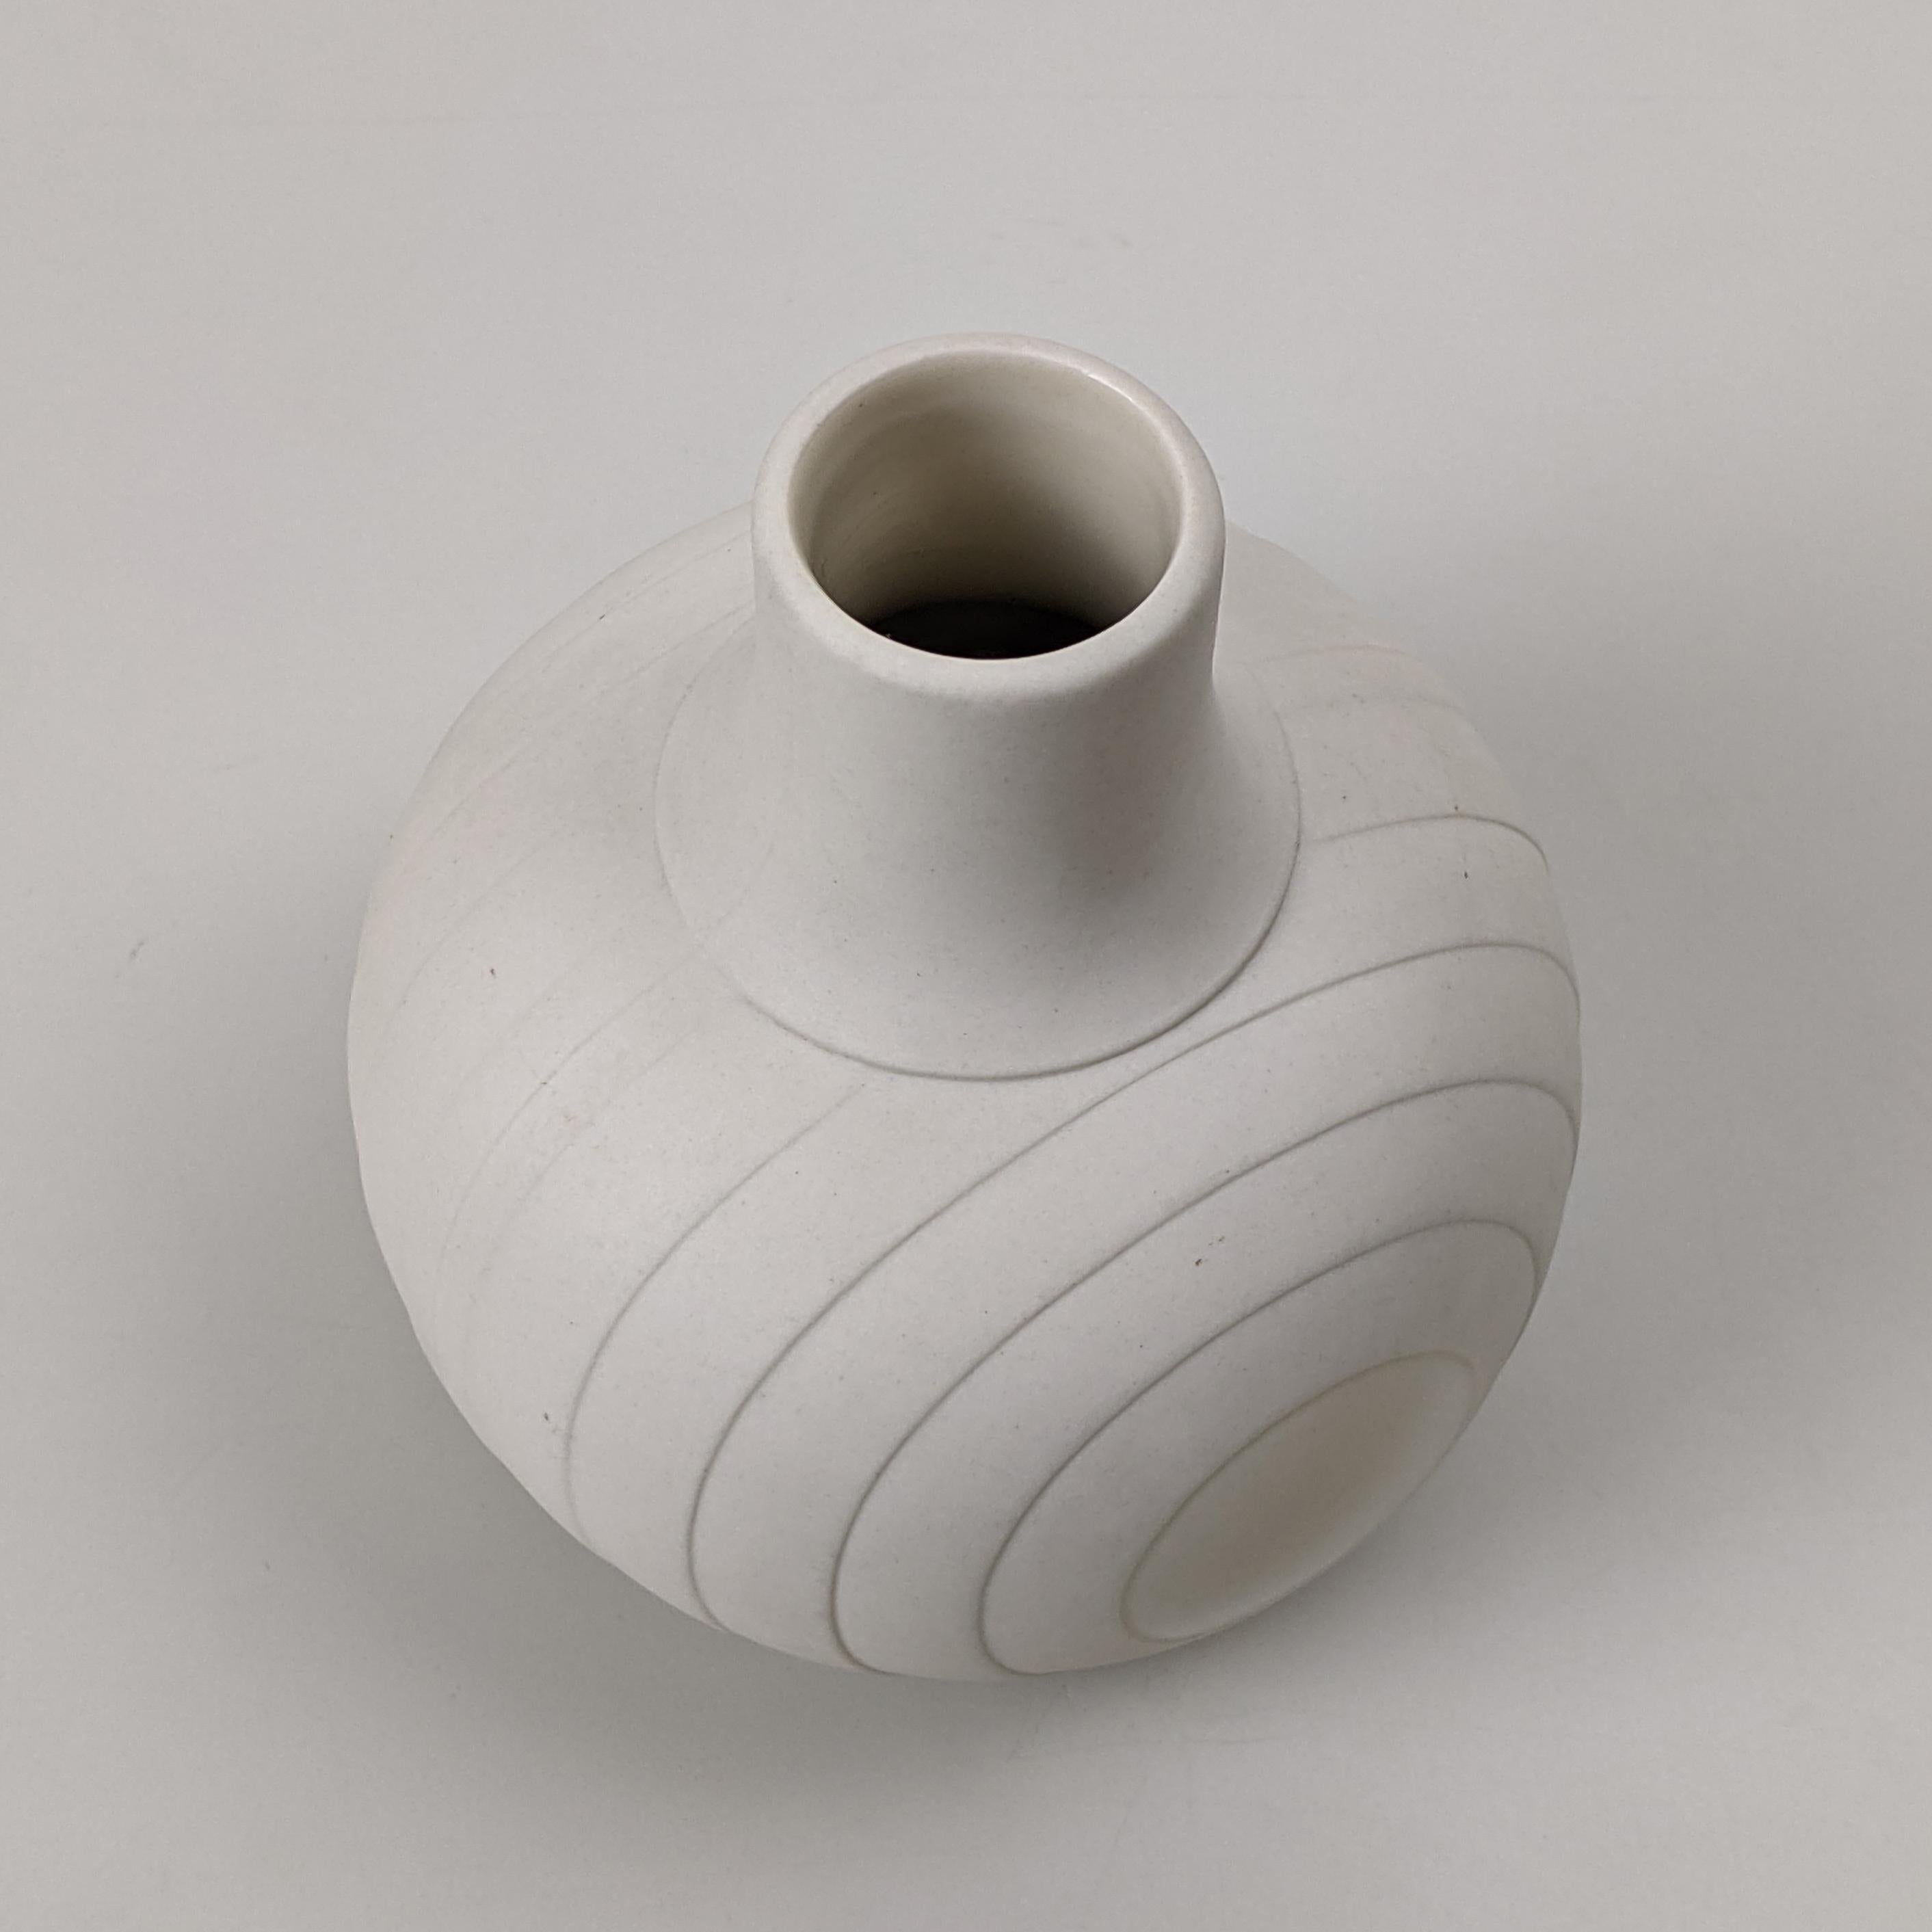 British Hornsea Small Vase from the ‘Concept’ Series, Designed 1977 by Martin Hunt